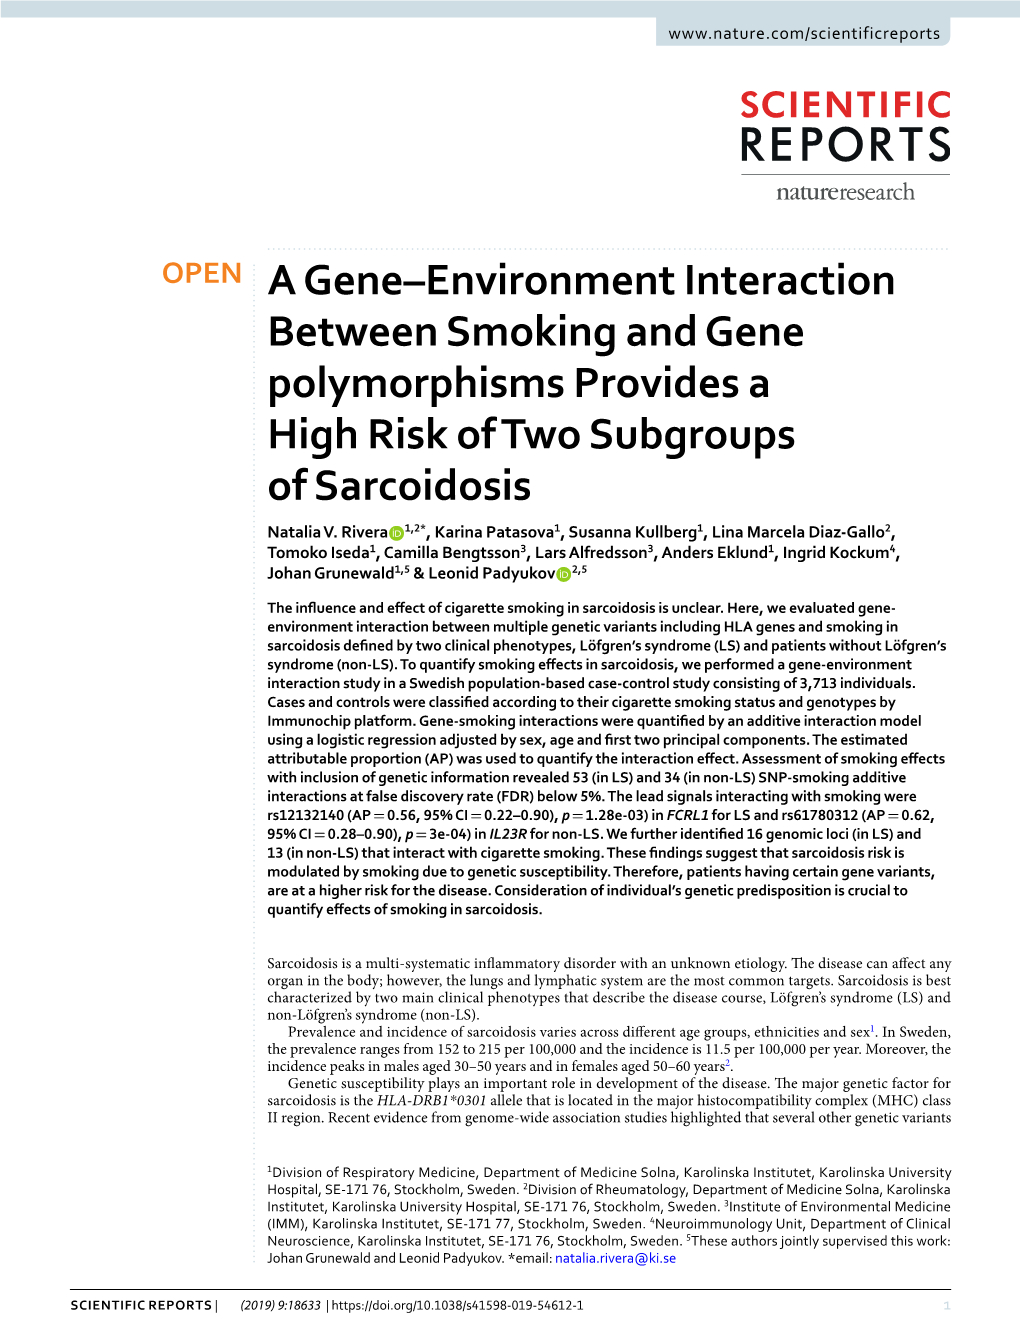 A Gene–Environment Interaction Between Smoking and Gene Polymorphisms Provides a High Risk of Two Subgroups of Sarcoidosis Natalia V